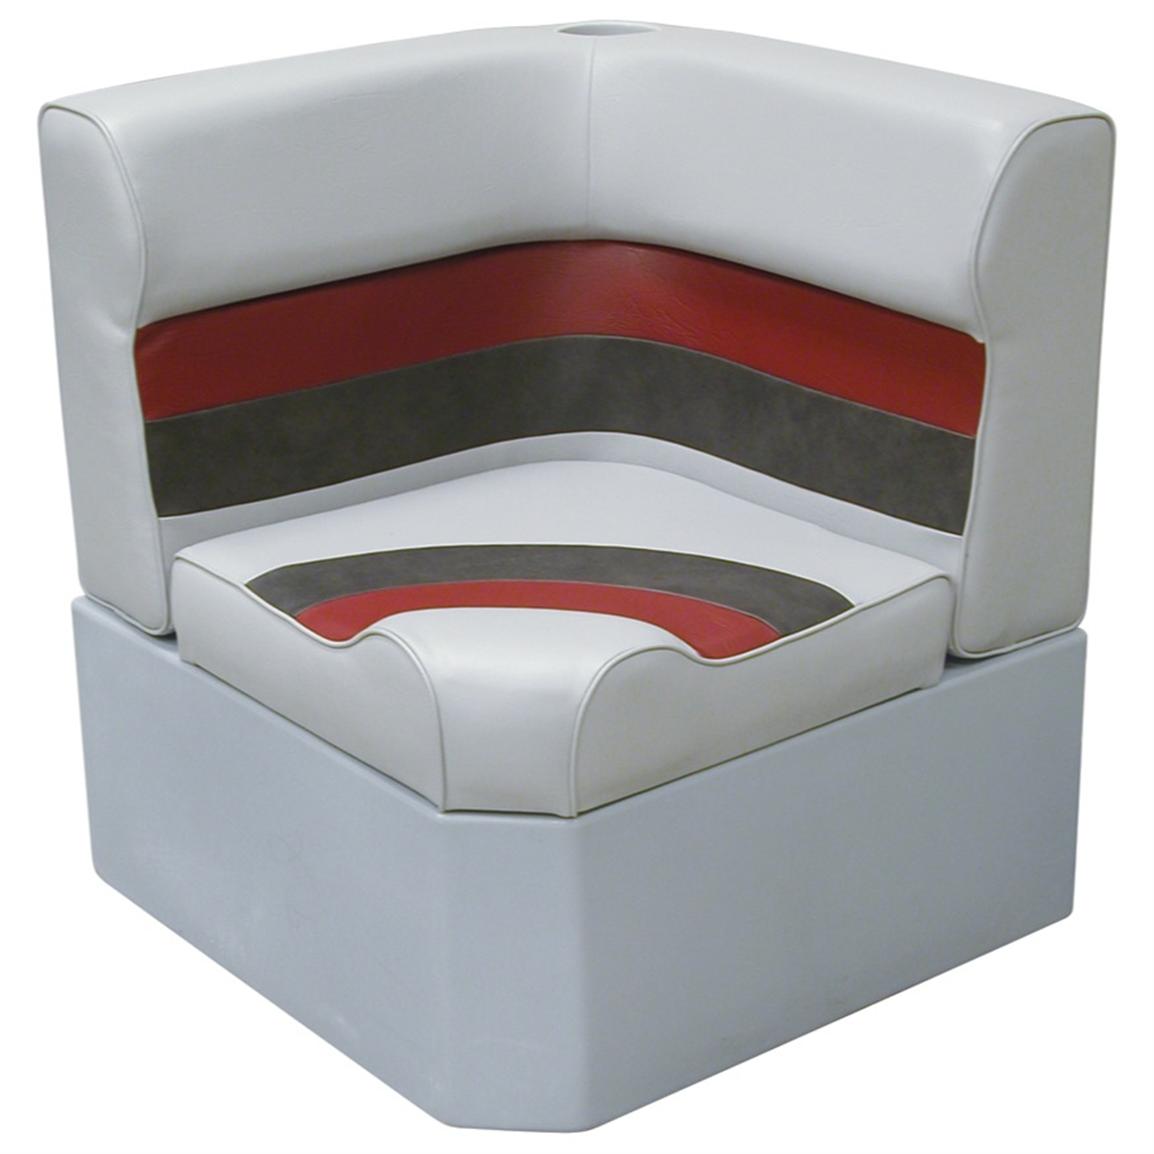 Wise® Deluxe Corner Pontoon Seat, Grey / Red / Charcoal